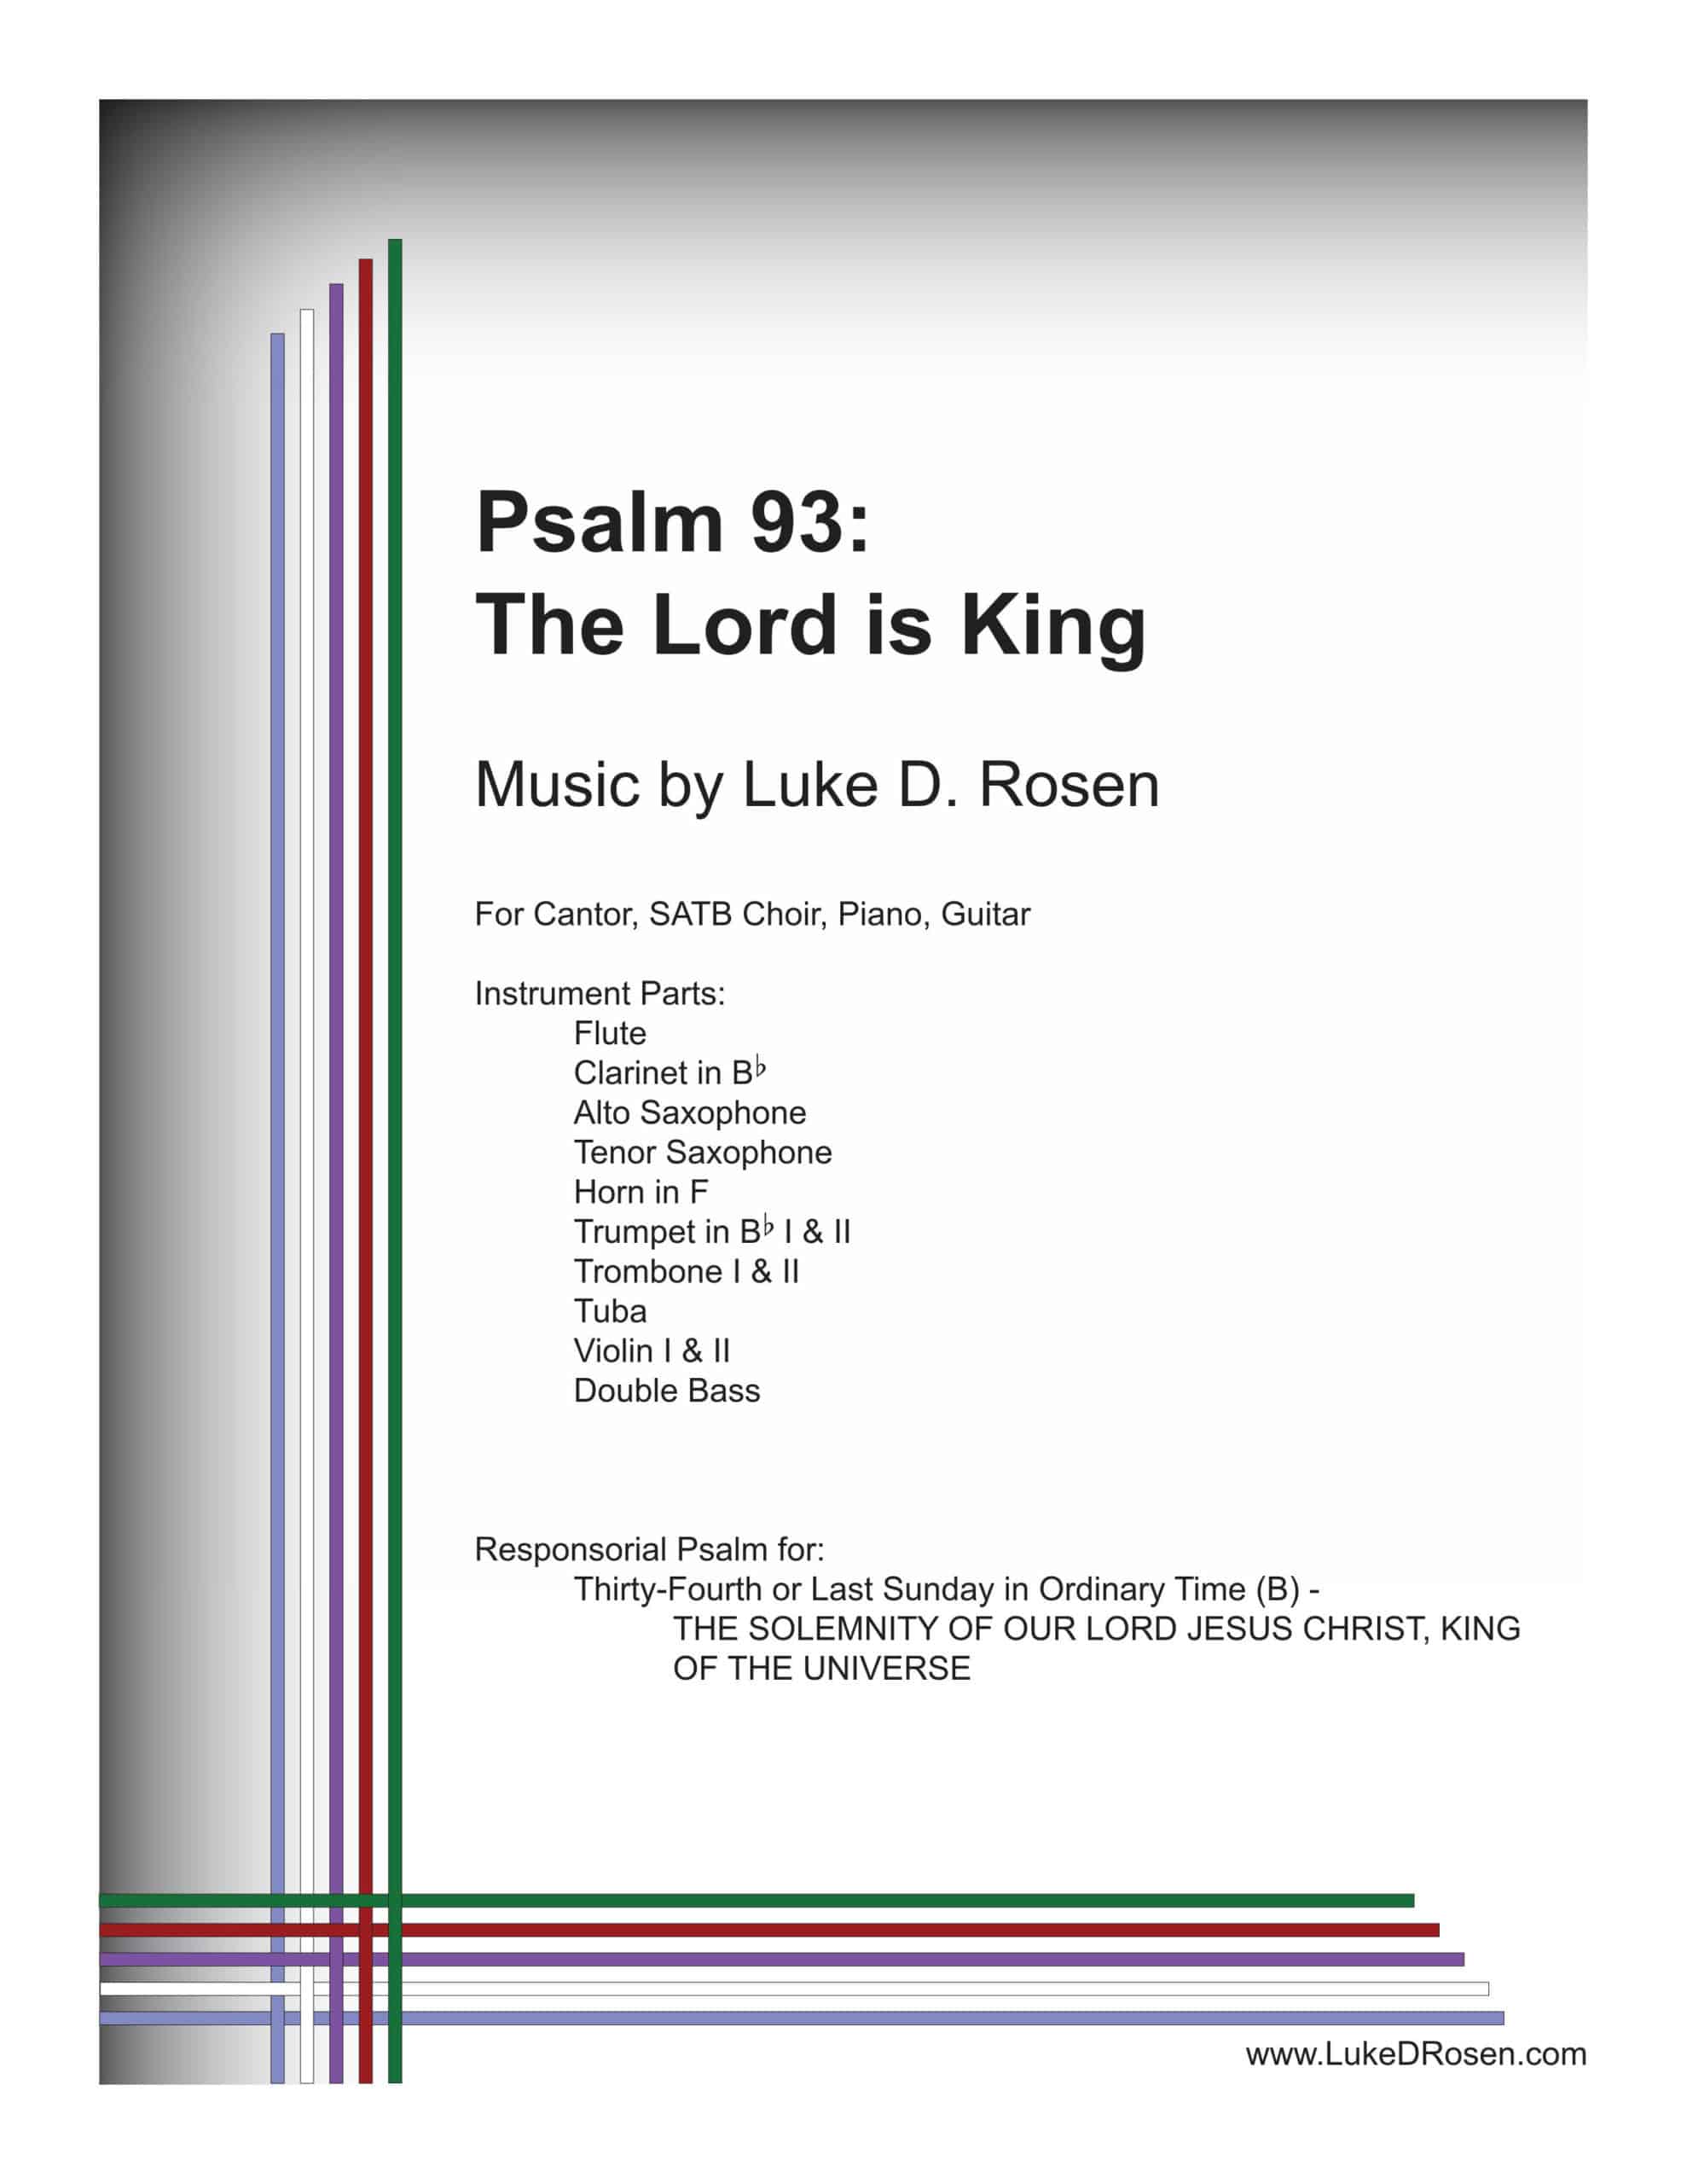 Psalm 93 – The Lord is King (Rosen)